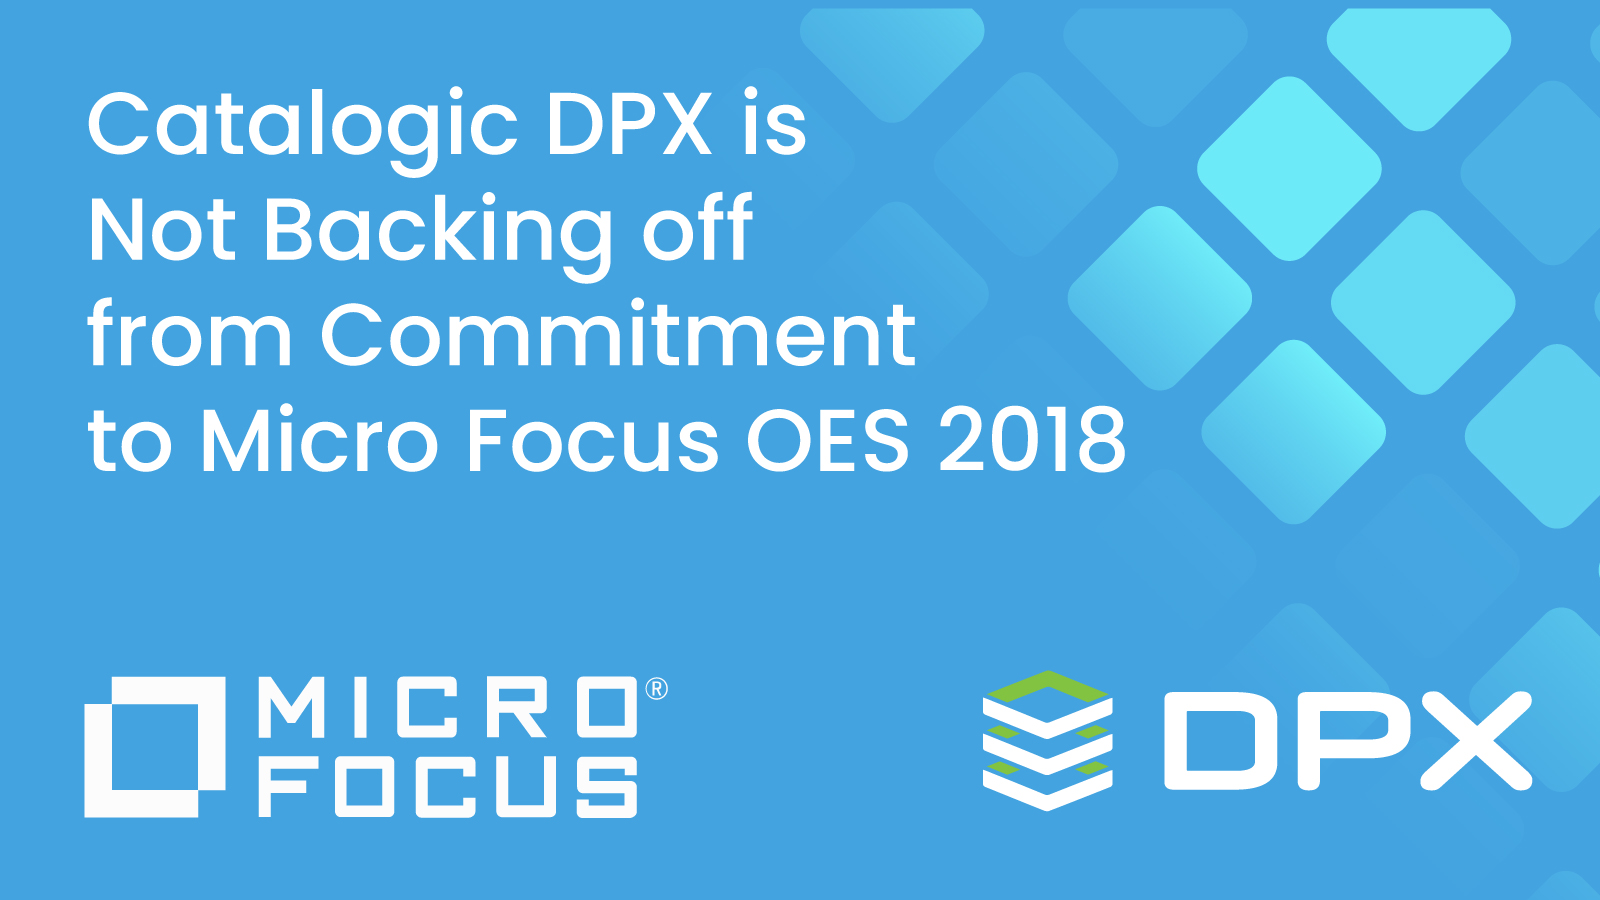 Catalogic DPX is Not Backing off from Commitment to Micro Focus OES